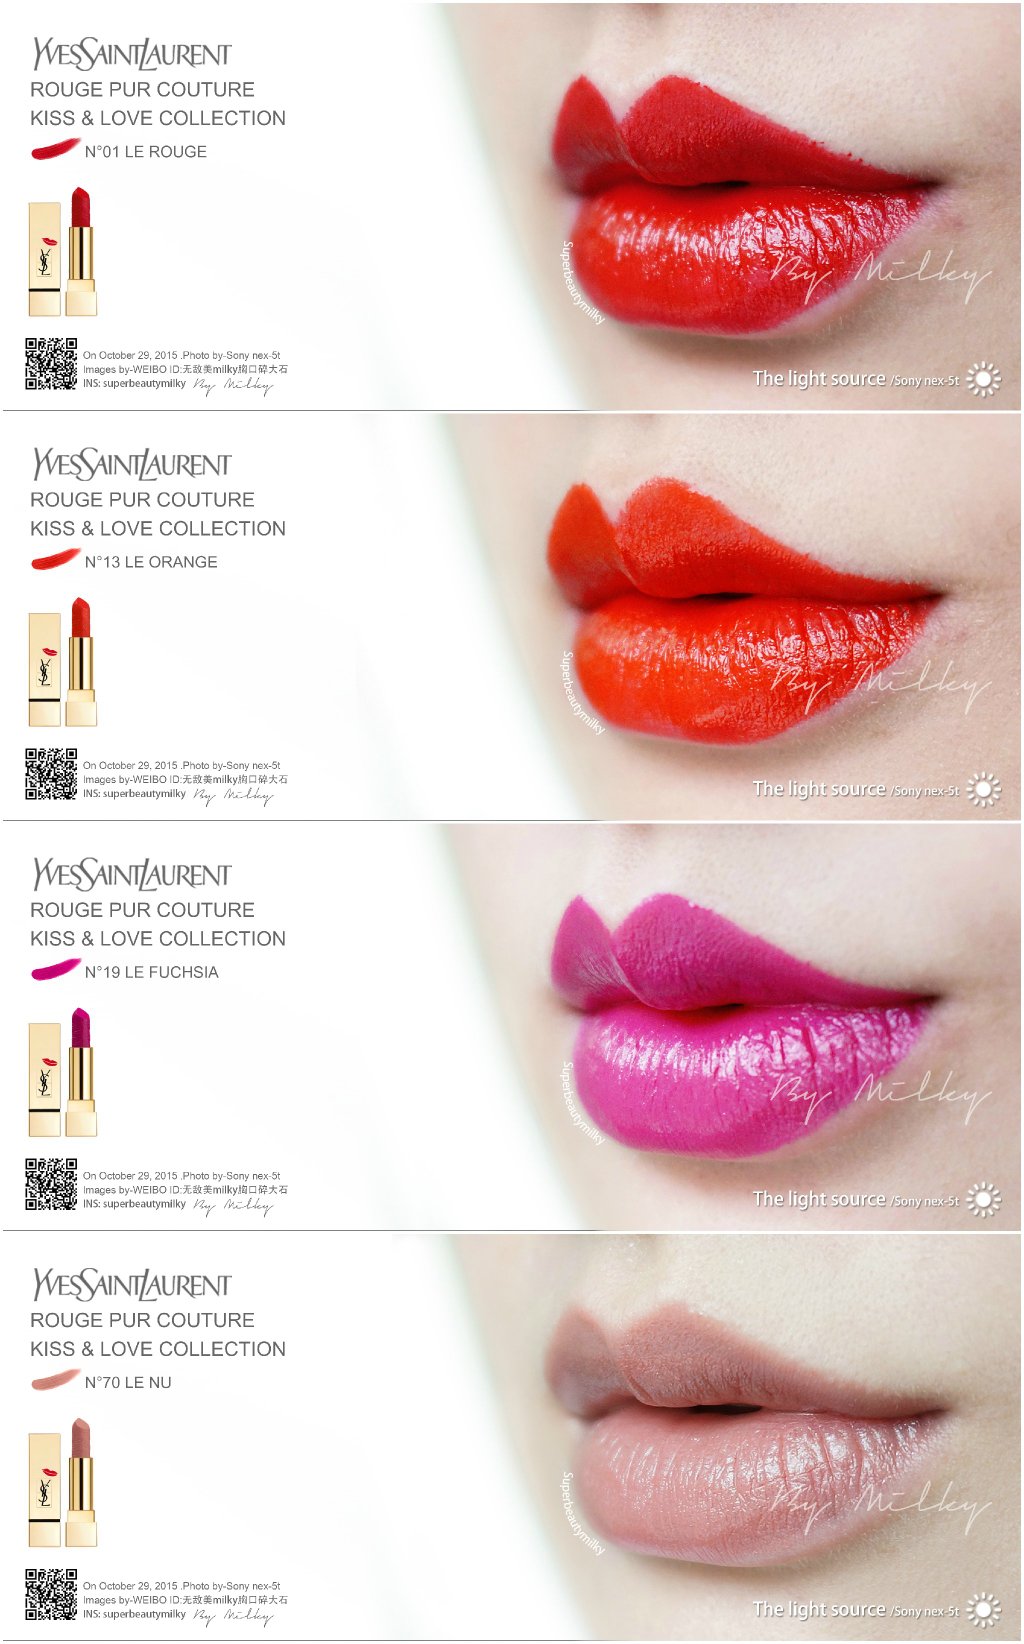 YSL ROUGE PUR COUTURE COLLECTOR KISS & LOVE EDITION/方管限量唇印主打色01/13/19/70 试色